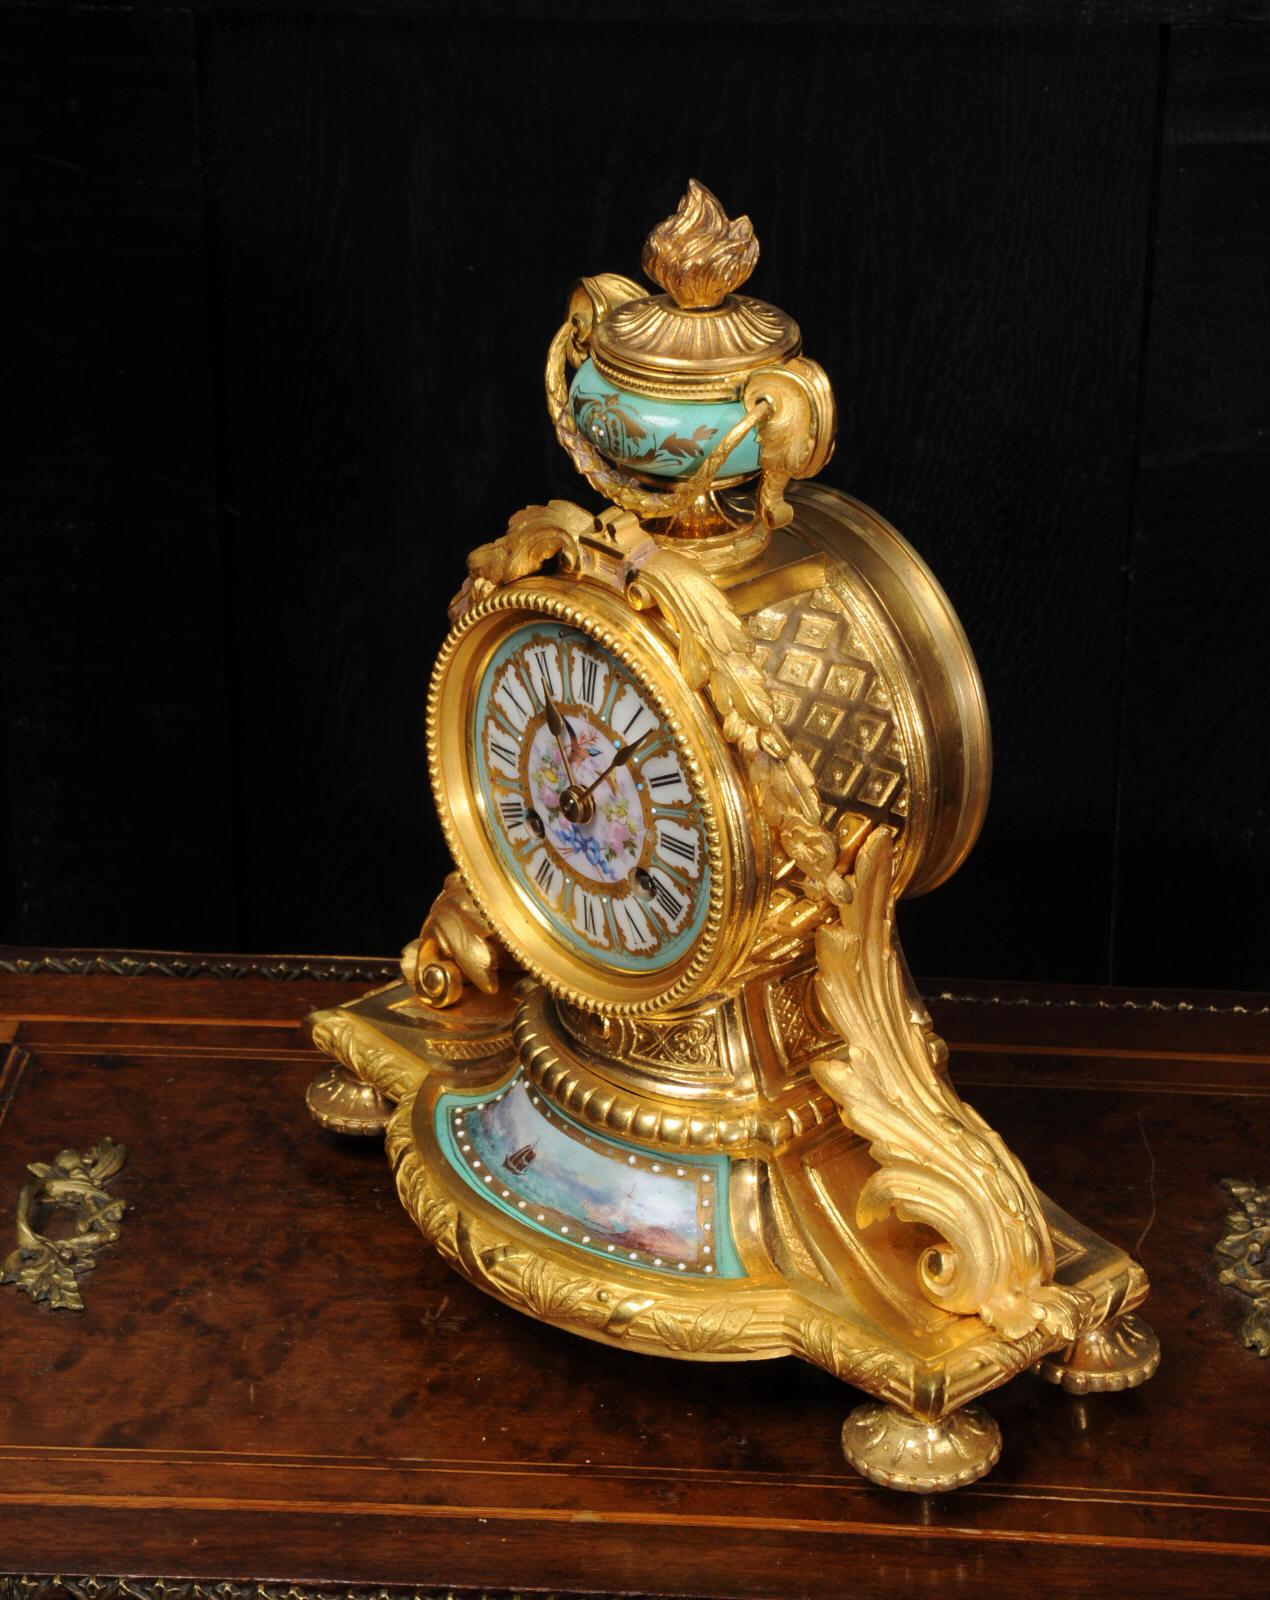 A lovely original antique French clock by Japy Frères, circa 1880. It is finely modelled in ormolu (finely gilded bronze) mounted with exquisite Sèvres style porcelain with an elegant green ground. The lower panel is a beautifully painted seascape